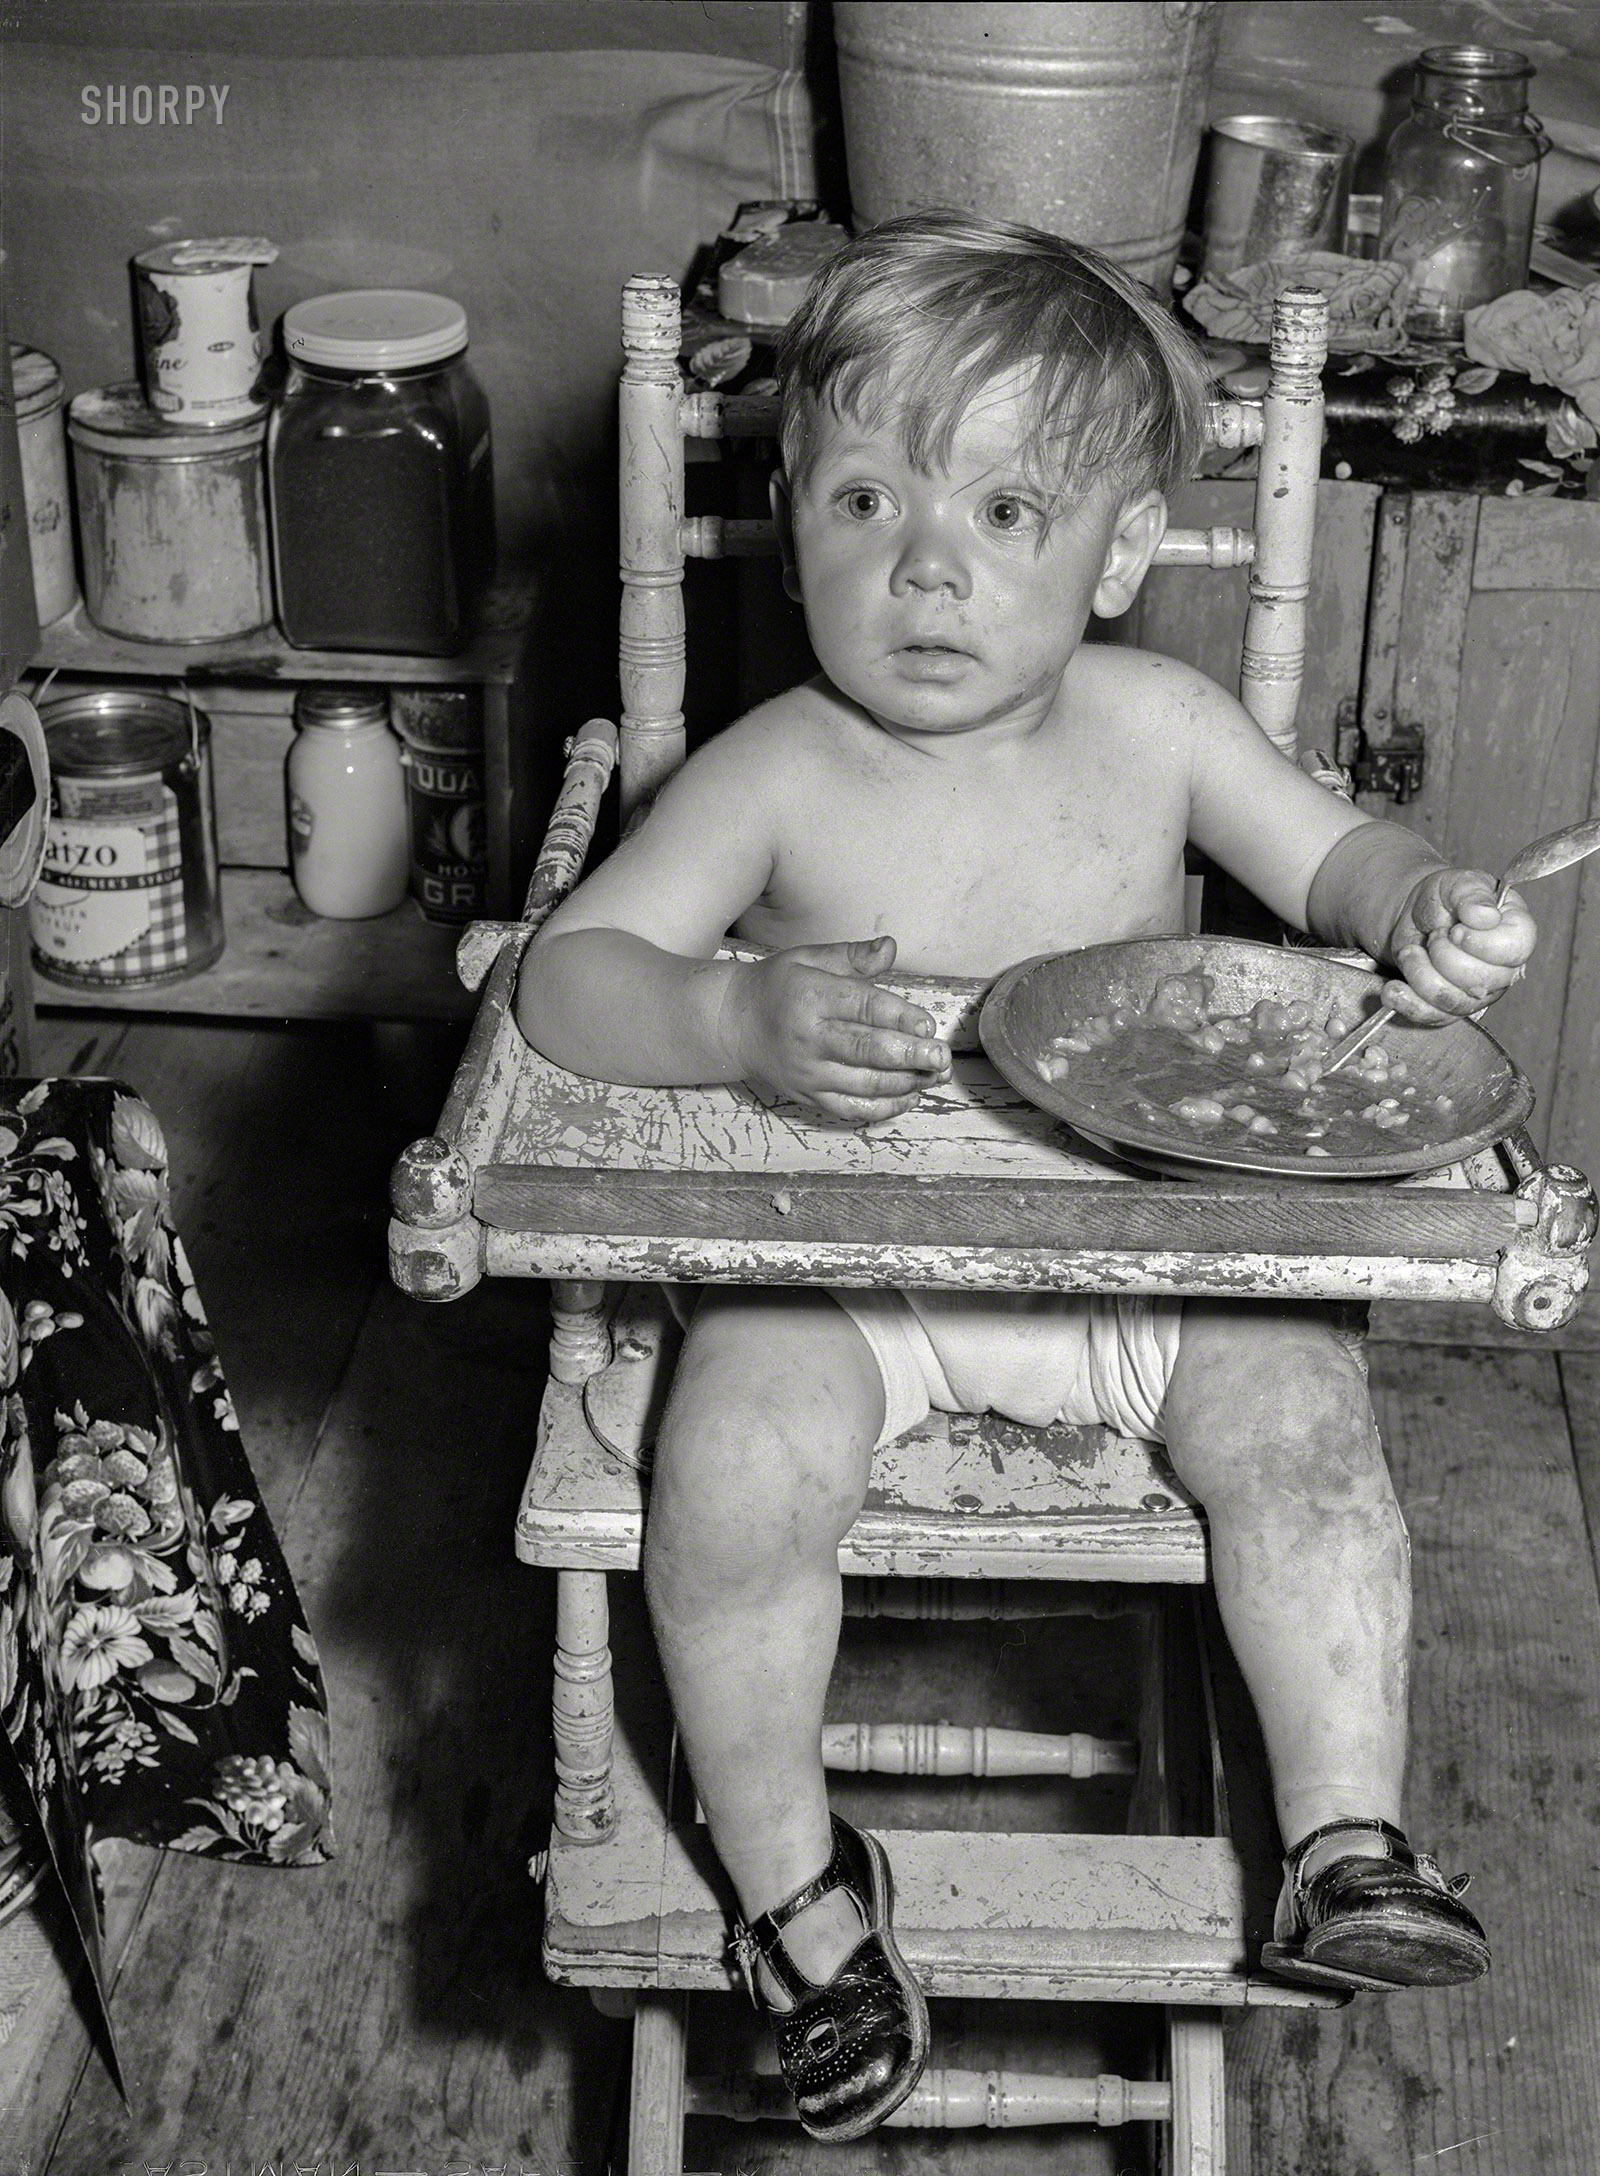 May 1941. "Child at FSA migratory labor camp mobile unit. Wilder, Idaho." Photo by Russell Lee for the Farm Security Administration. View full size.